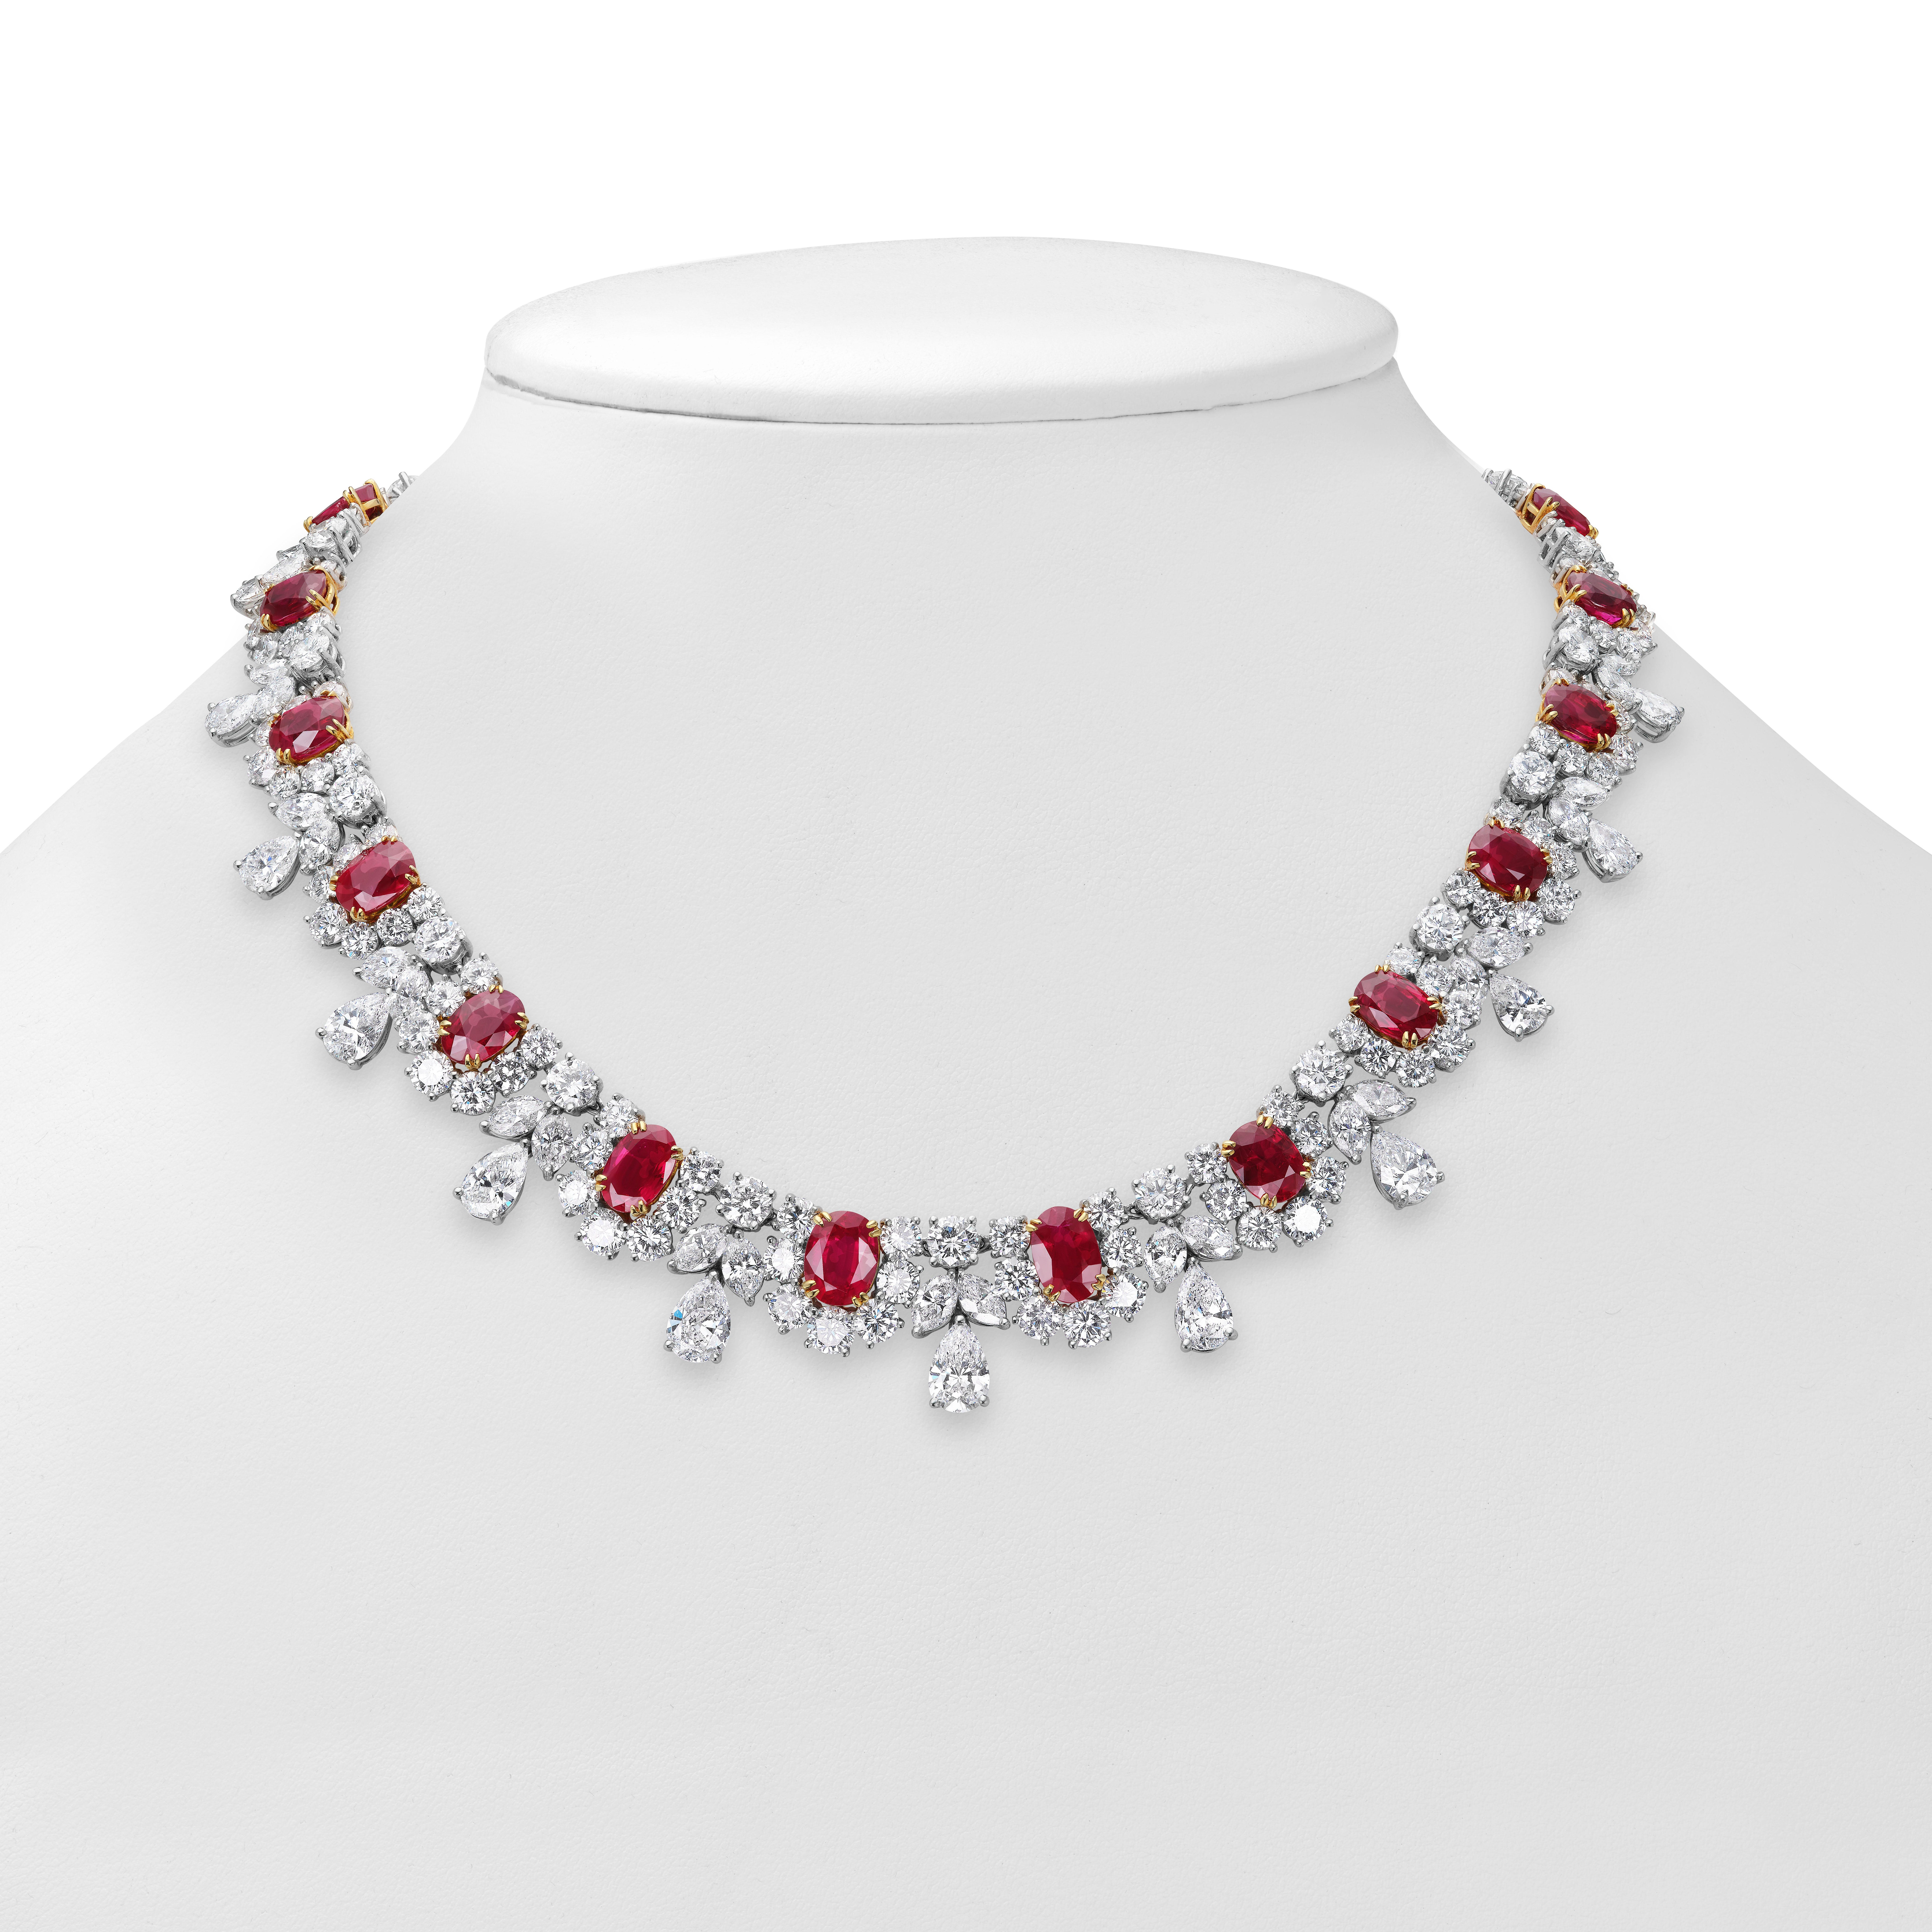 This spectacular necklace is built around 22 oval-cut Burma rubies ranging in size from approximately 2.50 carats to 0.95 carats totalling approximately 38 carats. The rubies exhibit a rich vivid red hue and excellent crystal transparency.  

Each